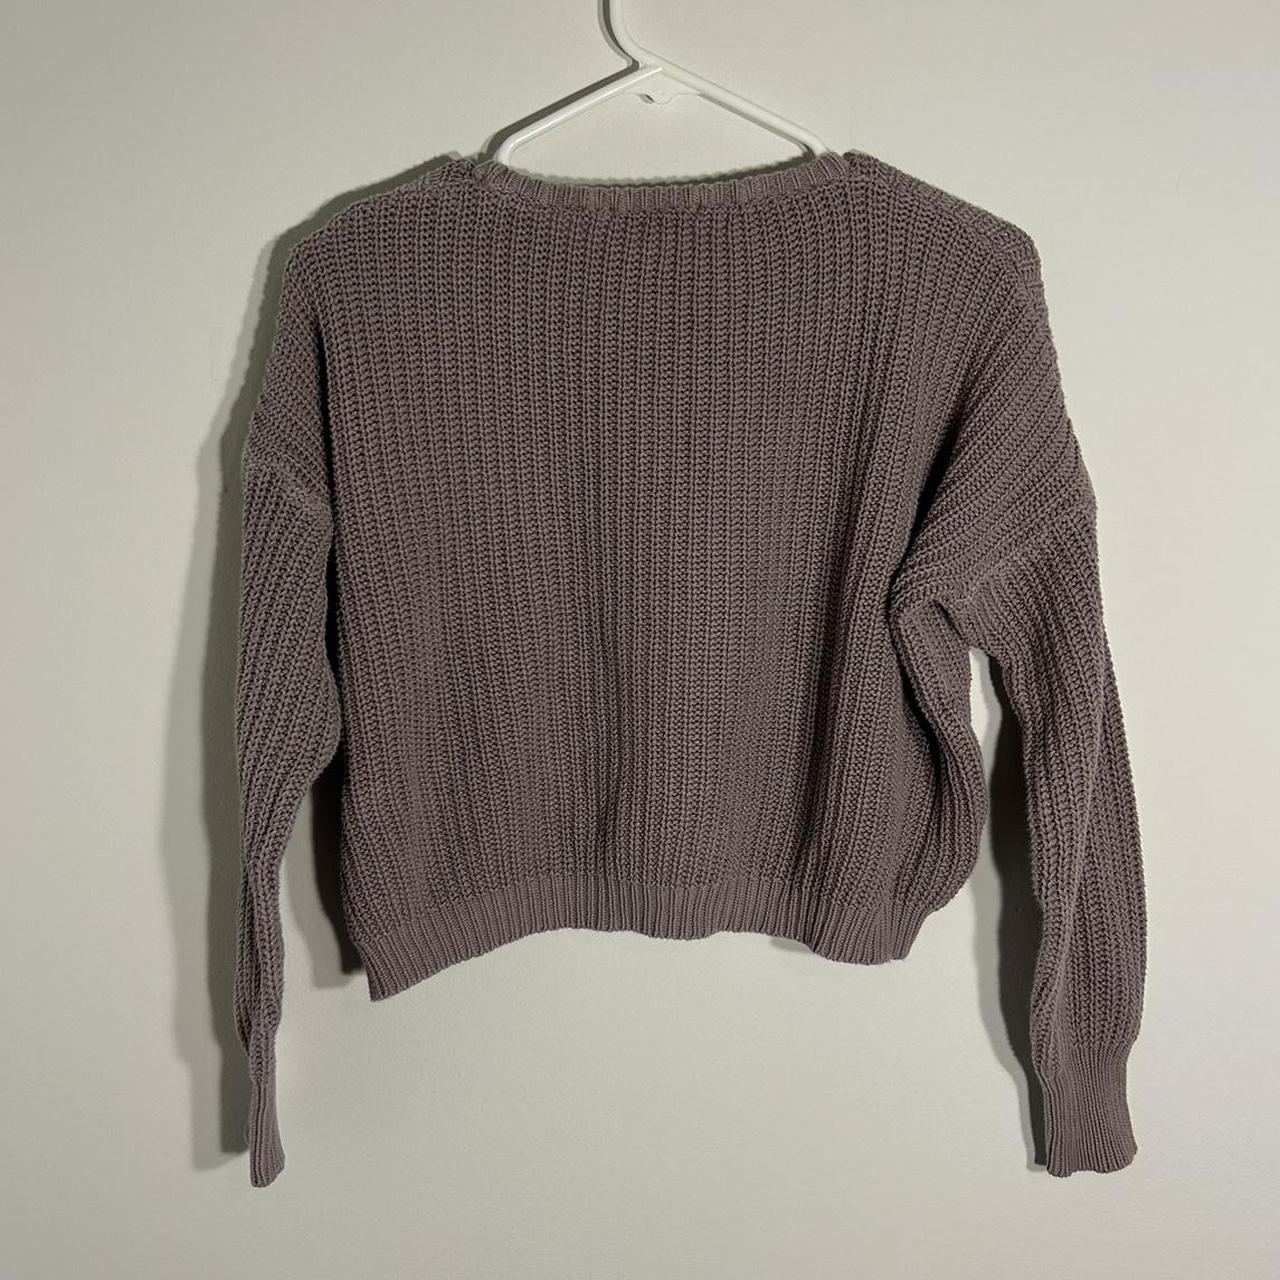 Brandy melville cropped sweater - mauve or dusty... - Depop